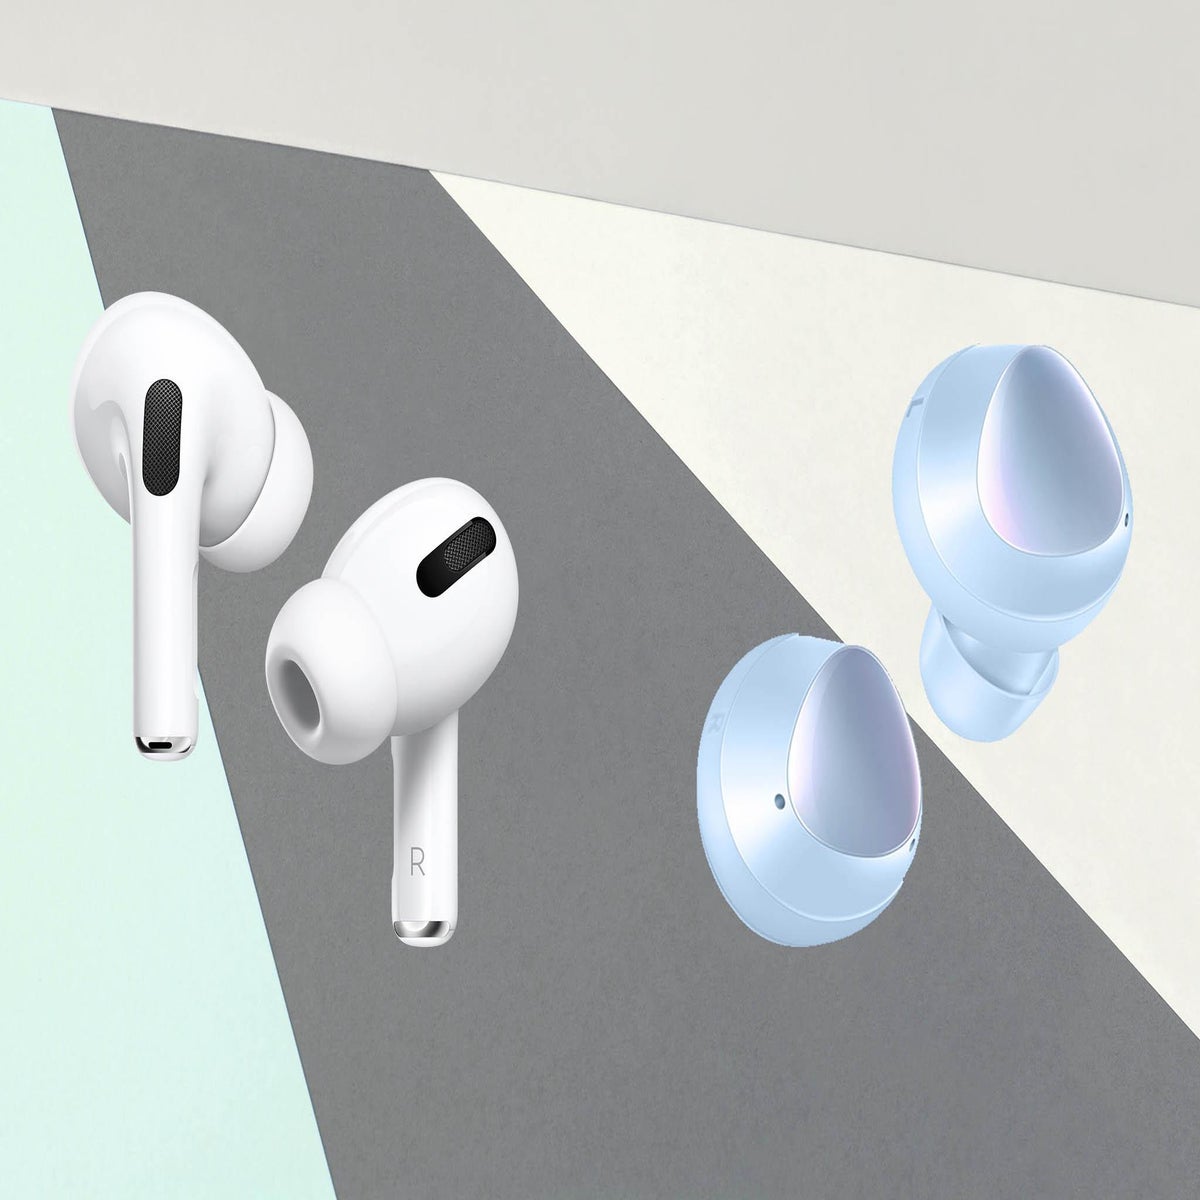 Compared: Apple's AirPods Pro vs Samsung Galaxy Buds Plus